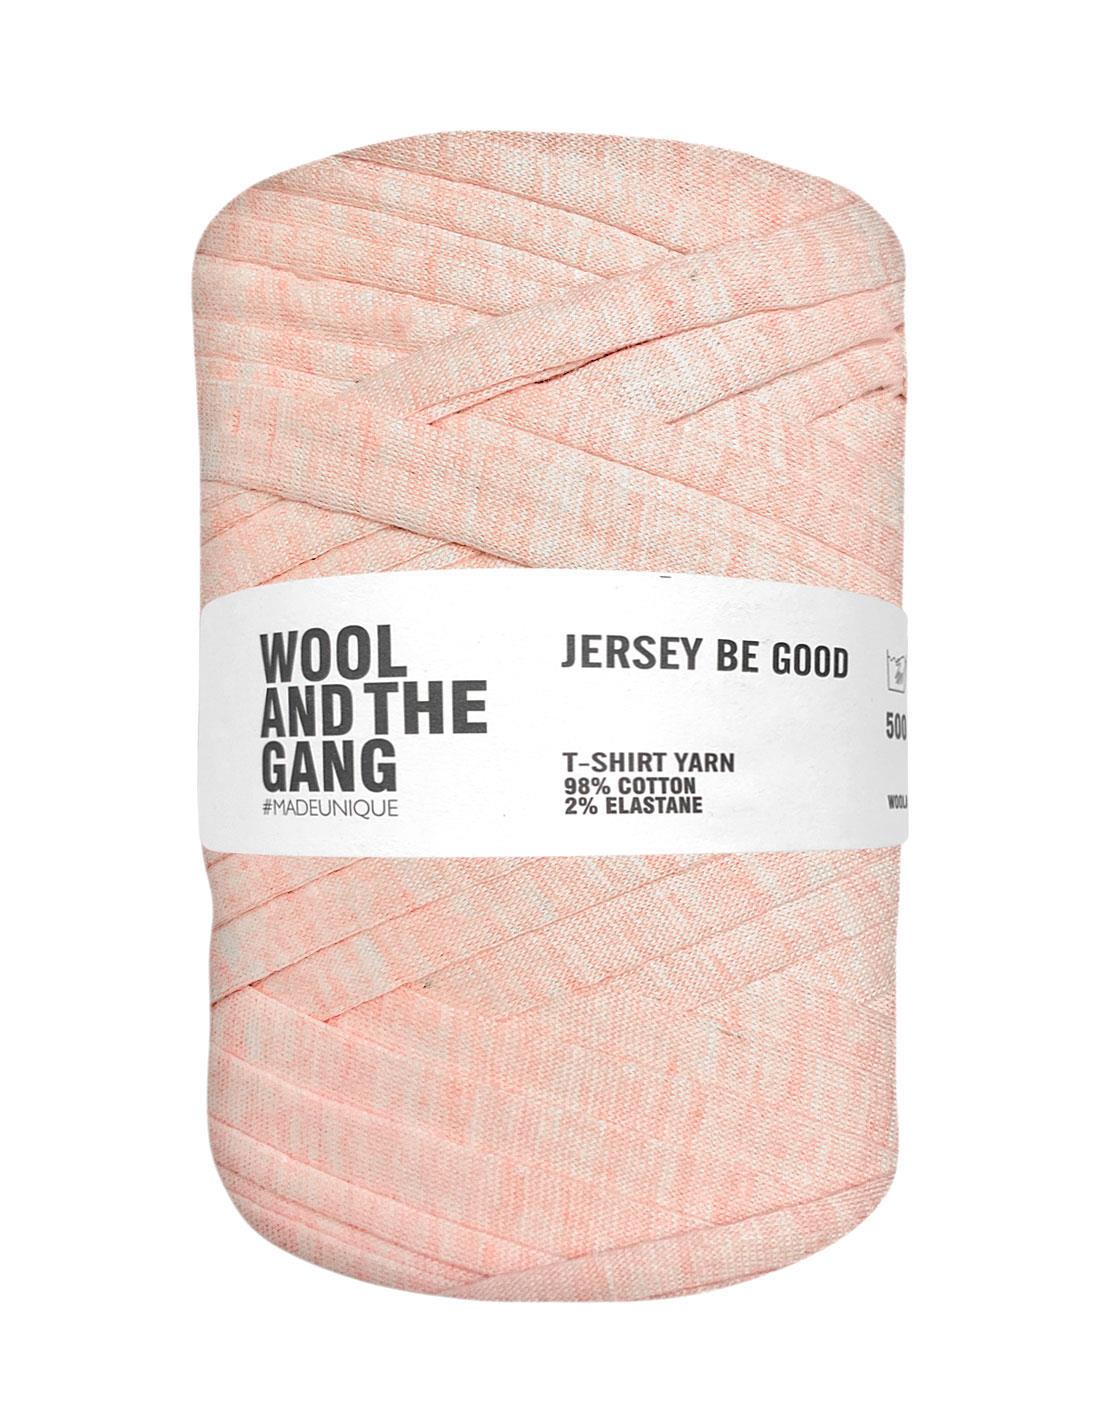 Mottled Pale Pink Jersey Be Good t-shirt yarn by Wool and the Gang (500g)